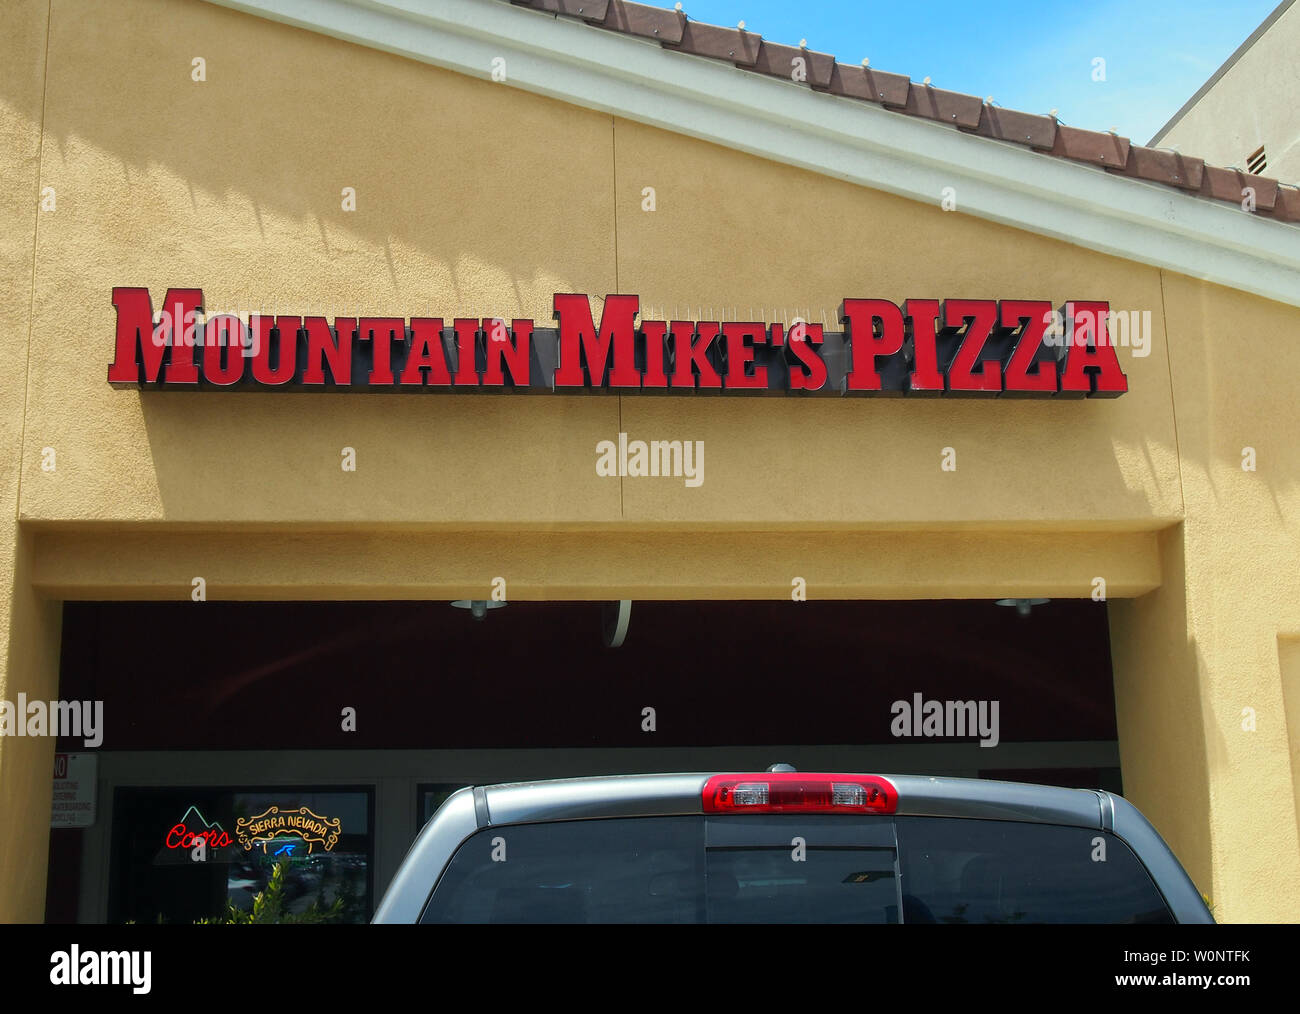 Mountain Mike S Pizza Size Chart